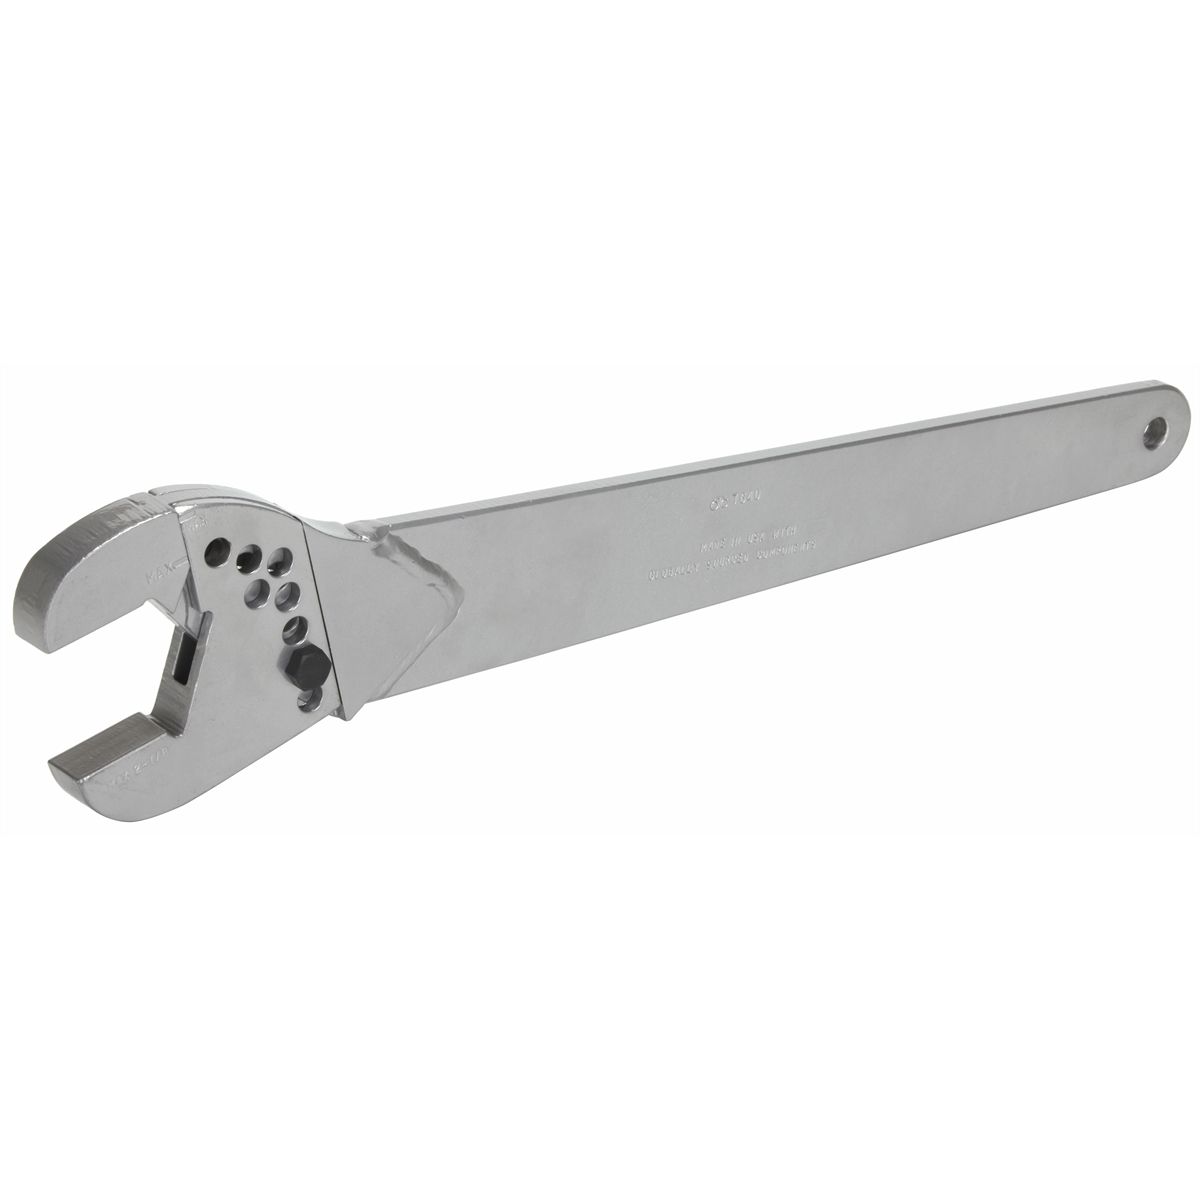 Adjustable Wrench - 1-3/8 In - 2-7/8 In Nut / Bolt Size